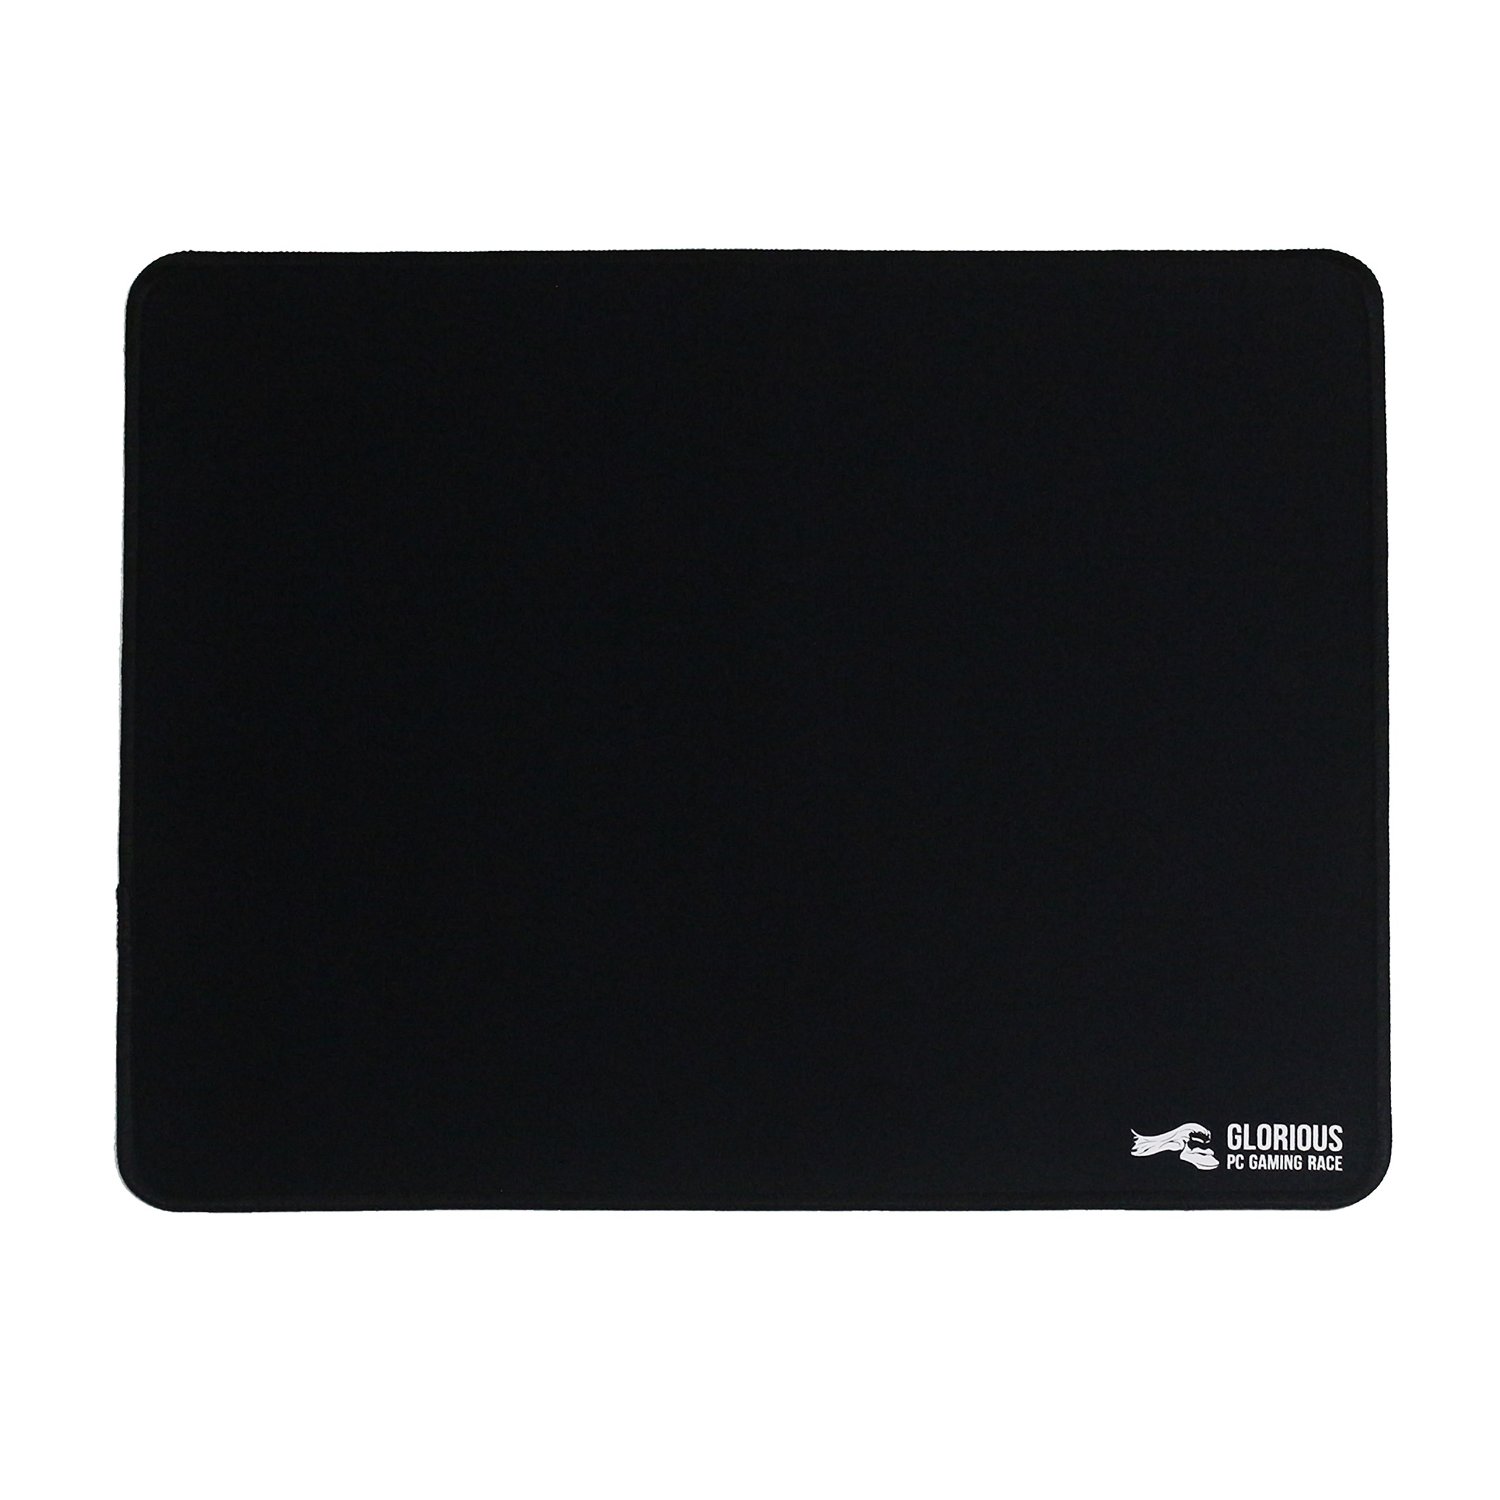 Glorious G-L Large Pro Gaming Surface - Black 330x280x2mm